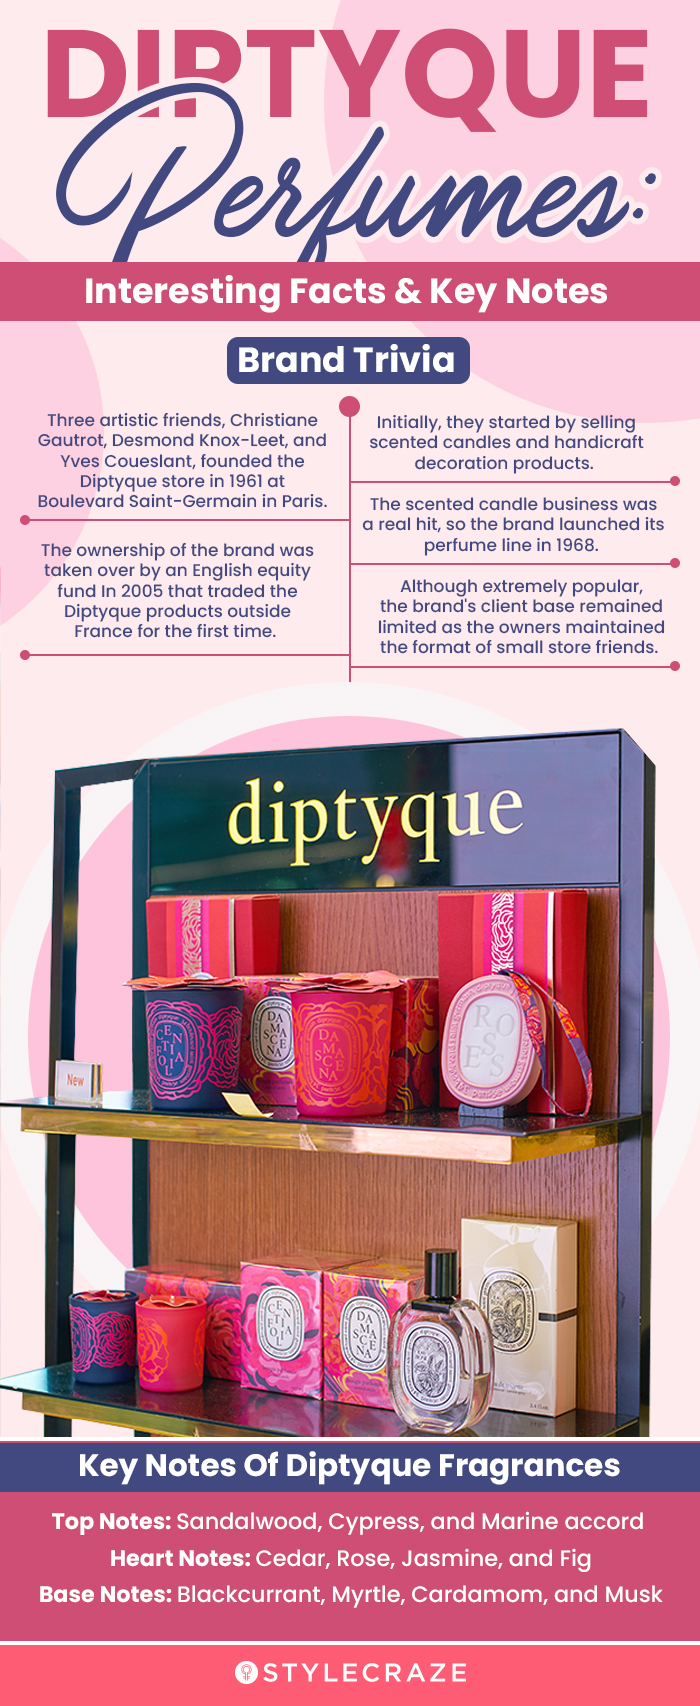 Diptyque Perfumes: Interesting Facts & Key Notes (infographic)